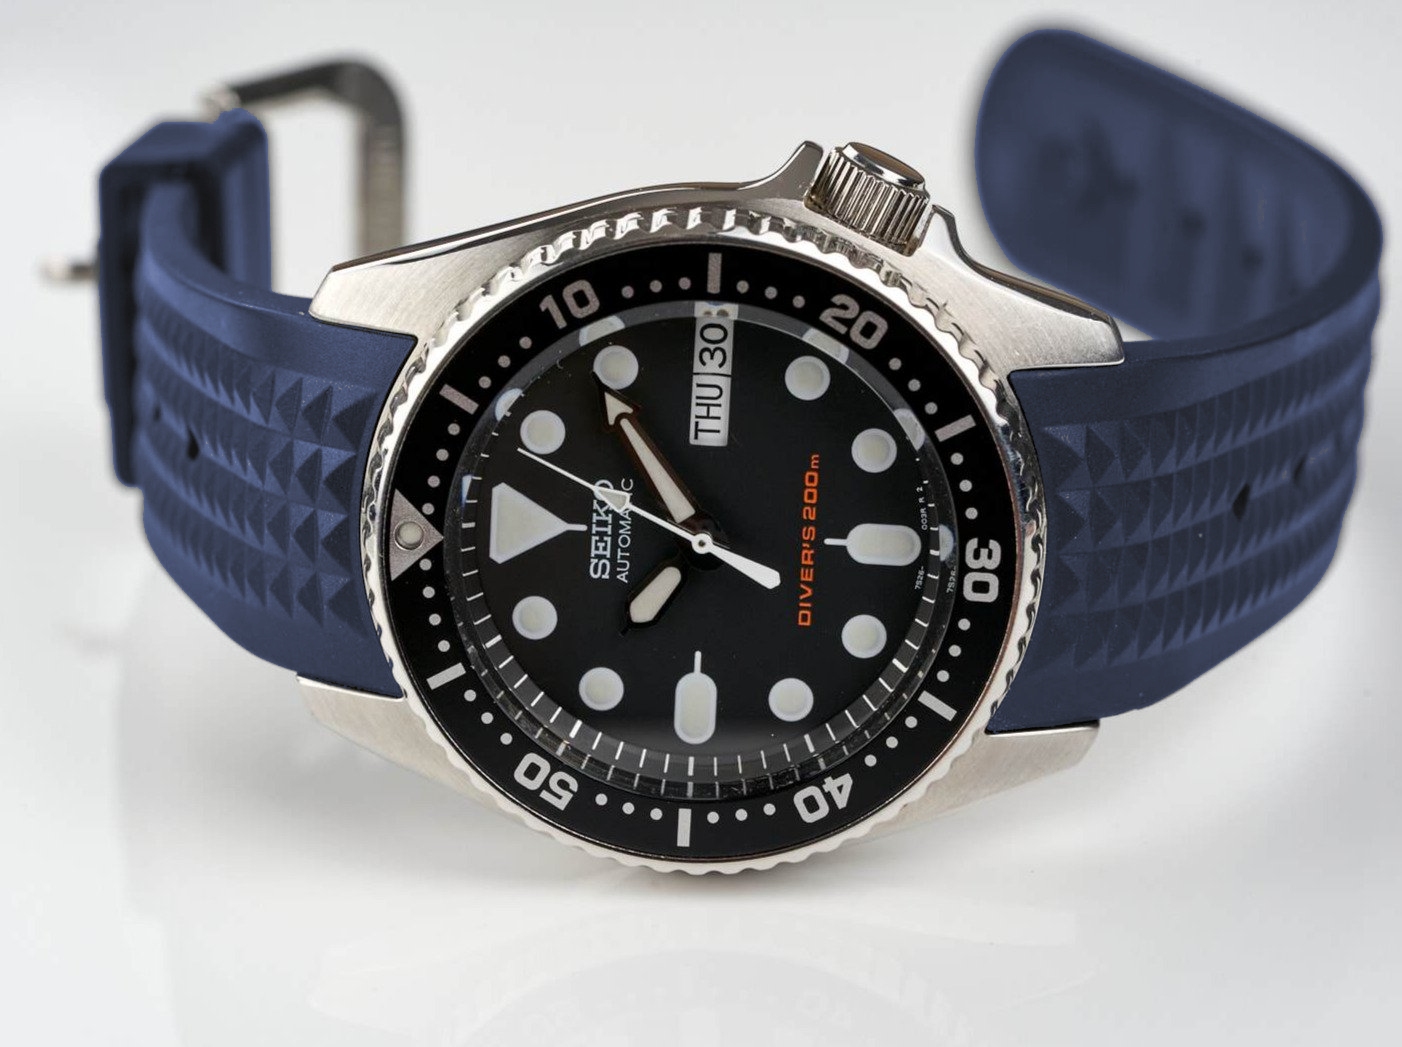 Seiko] SKX013 on tropic rubber. : r/Watches